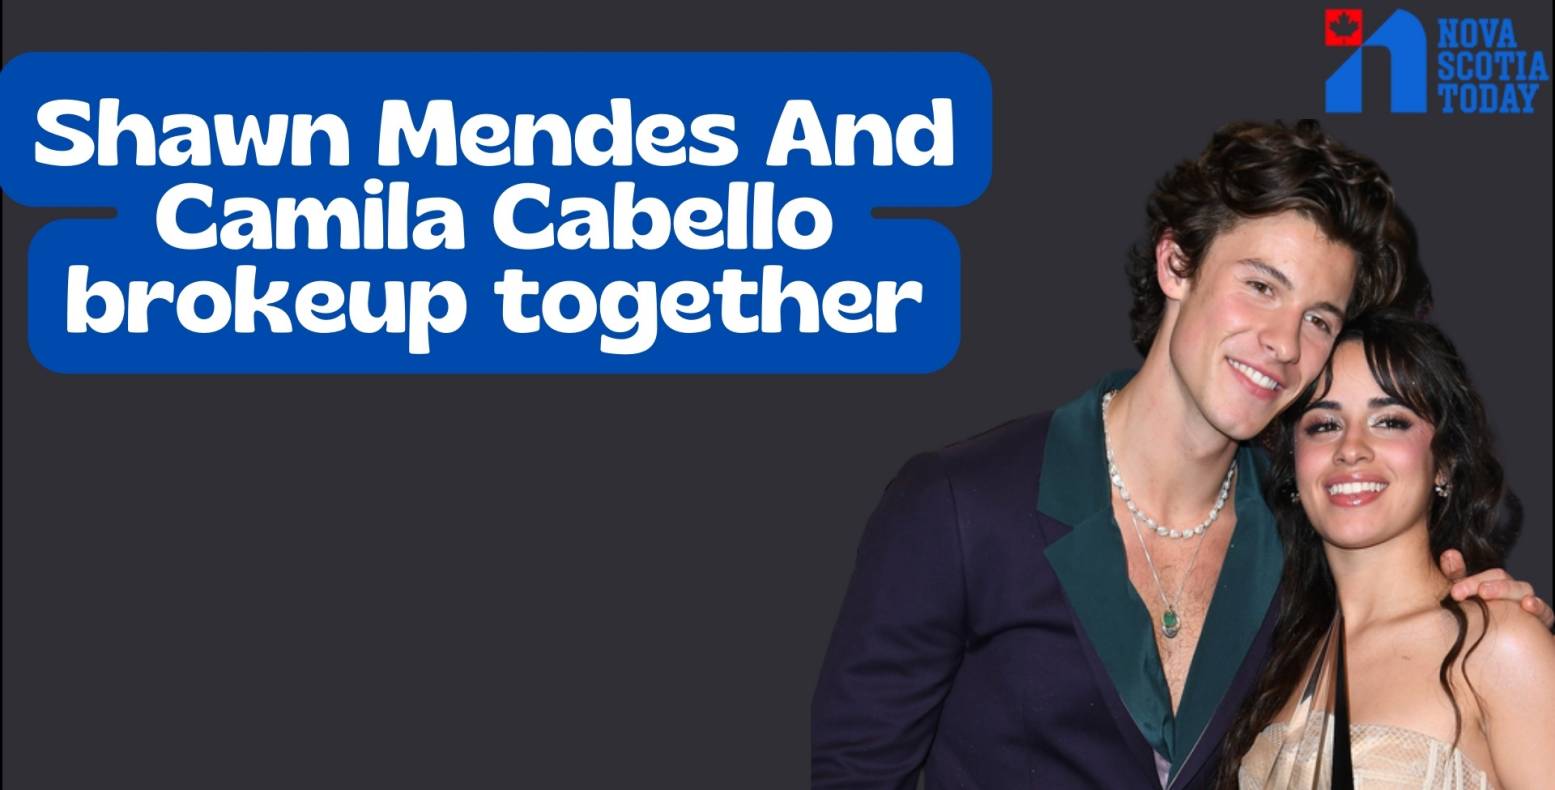 Shawn Mendes And Camila Cabello brokeup together